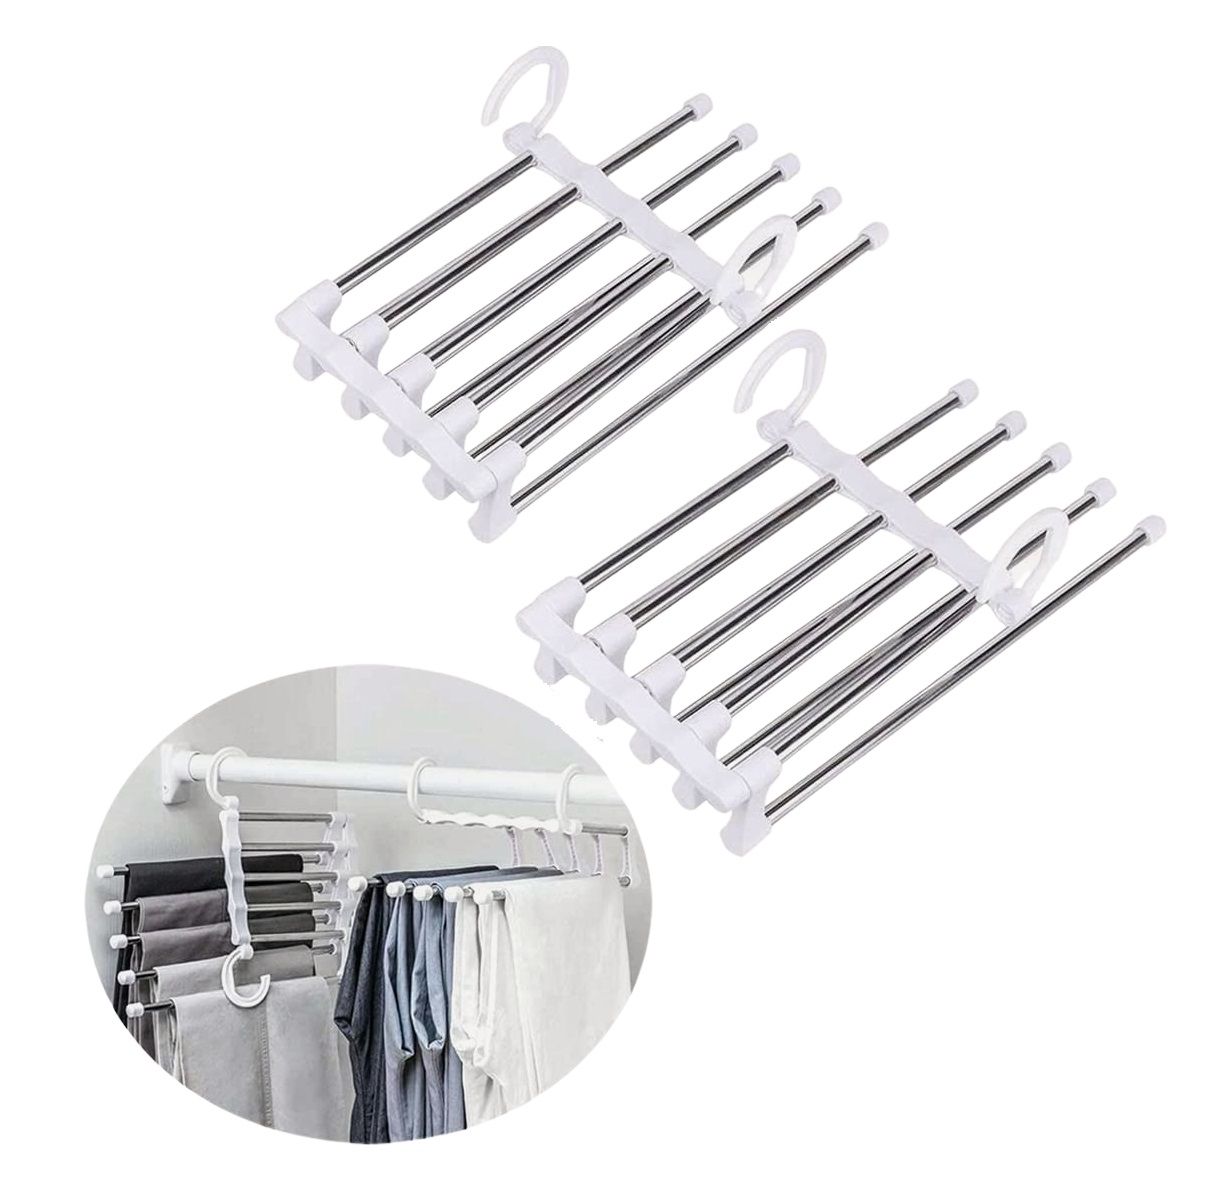 2-pack-stainless-steel-adjustable-5-in-1-pants-hangers-non-slip-space-saving-for-home-storage